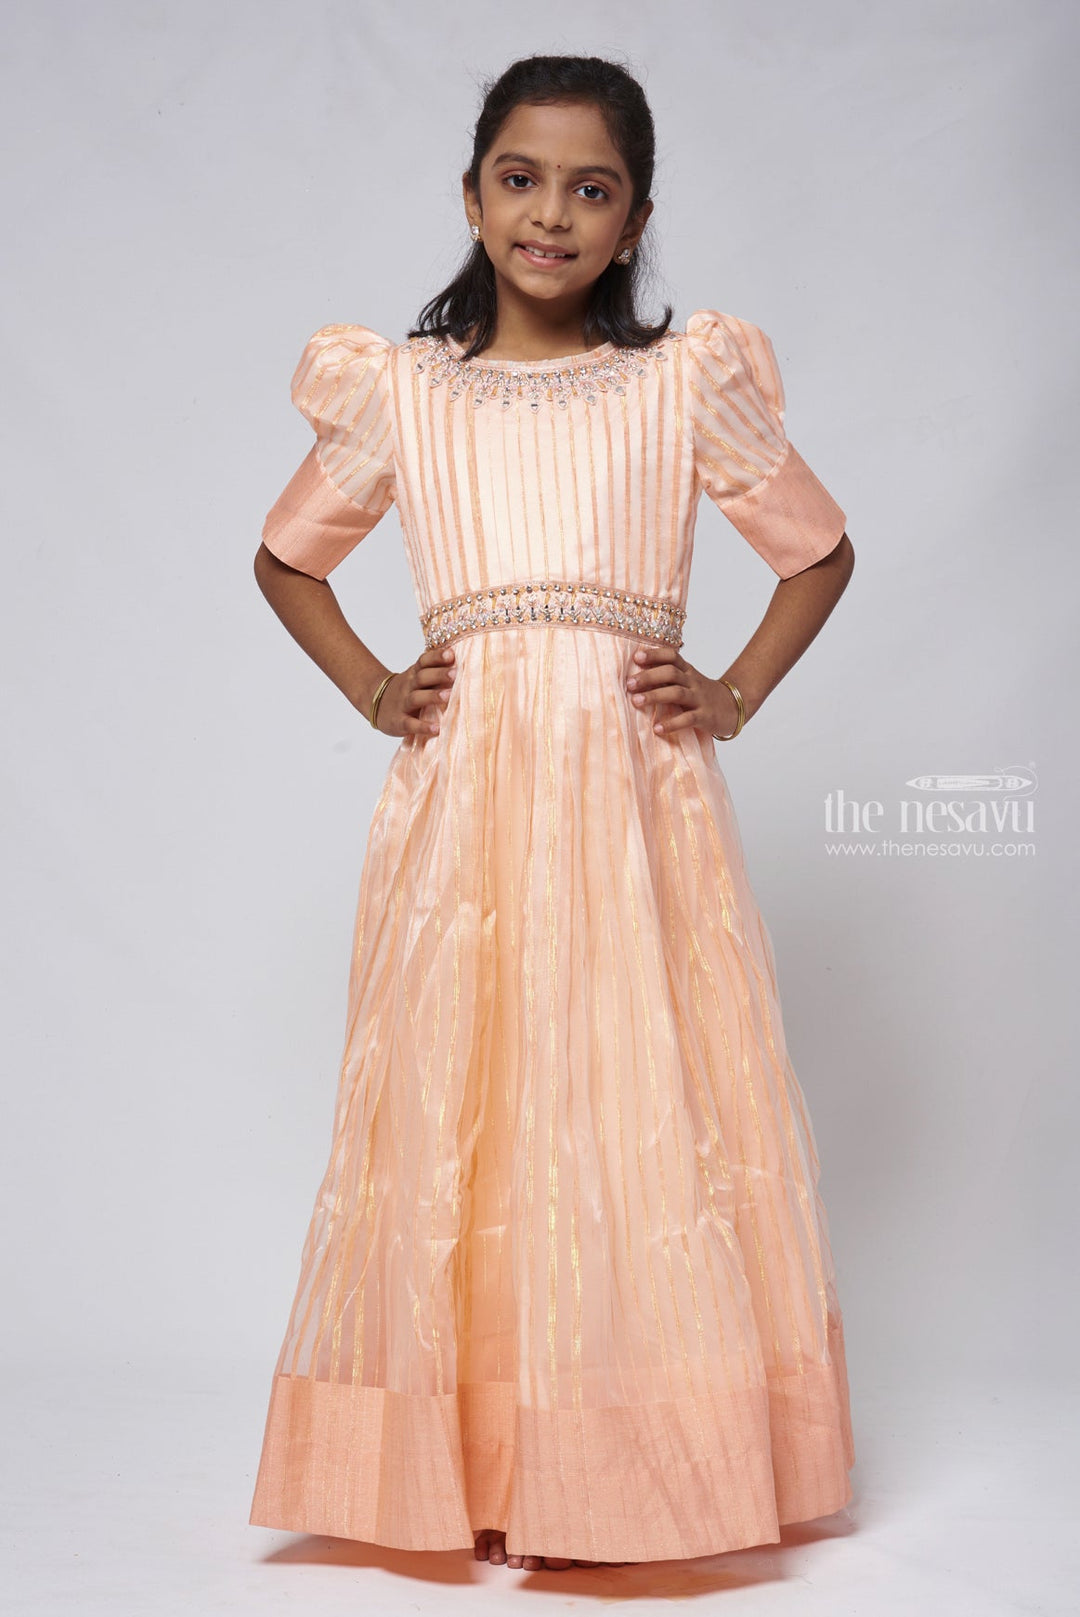 The Nesavu Party Gown Peach Organza Party Wear Gown Dress with Faux Mirror Embellished Hip Band Nesavu 18 (2Y) / Salmon / Organza GA136D-18 Peach Organza Party Wear Gown Dress with Faux Mirror Embellished Hip Band | The Nesavu